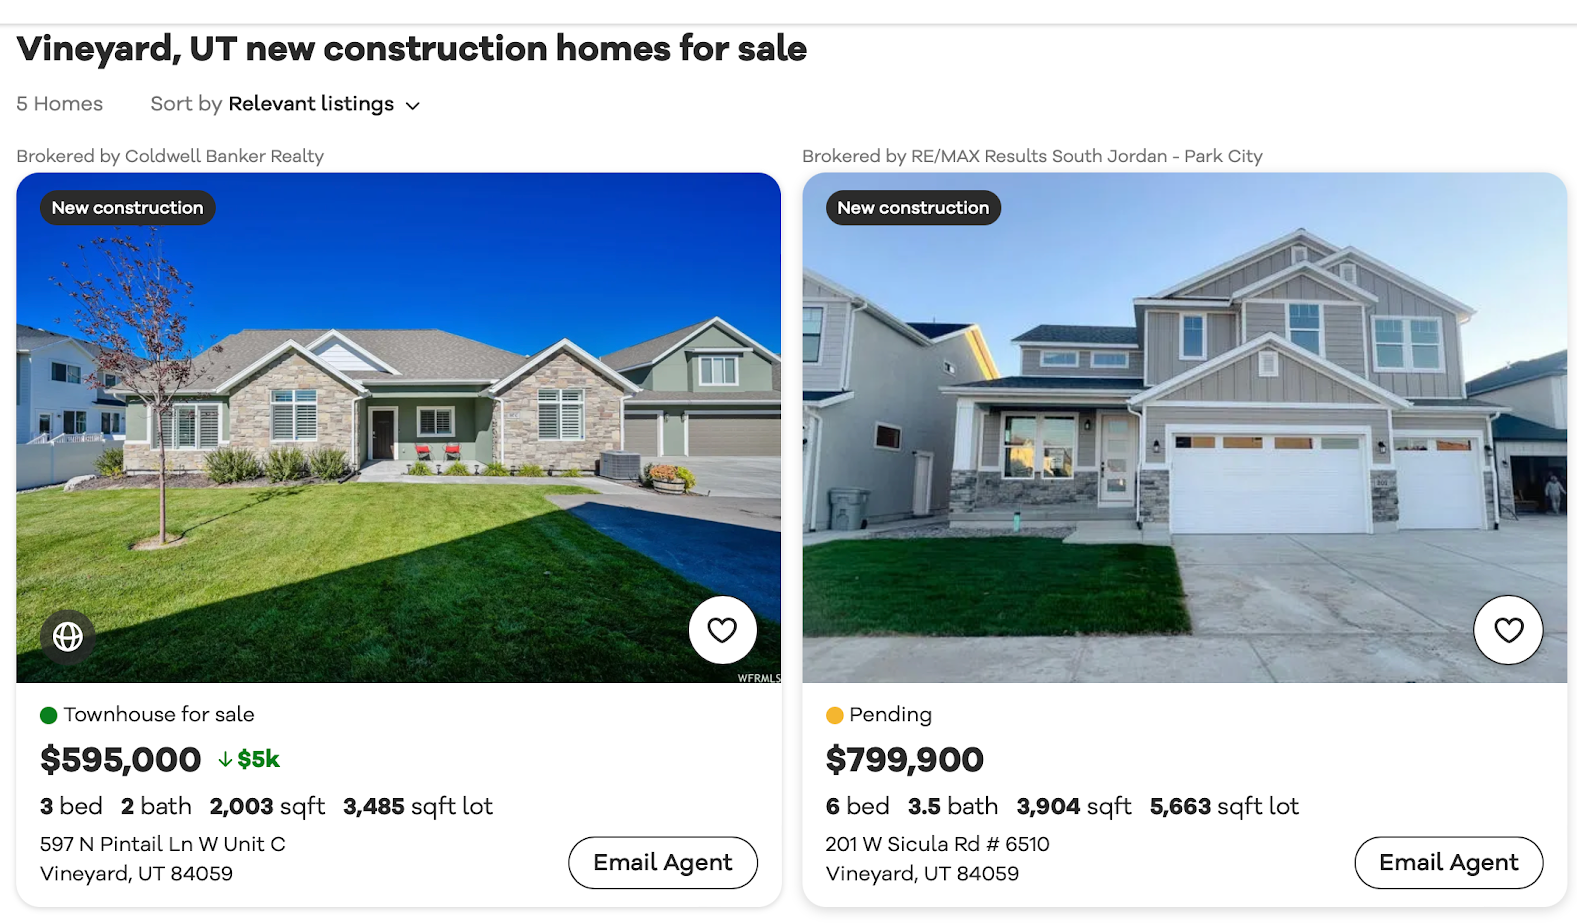 This is a screenshot of a sample of new construction homes for sale from our website home search page results, by Katerina Gasset and Tristan Gasset of The Gasset Group Brokered by EXP realty